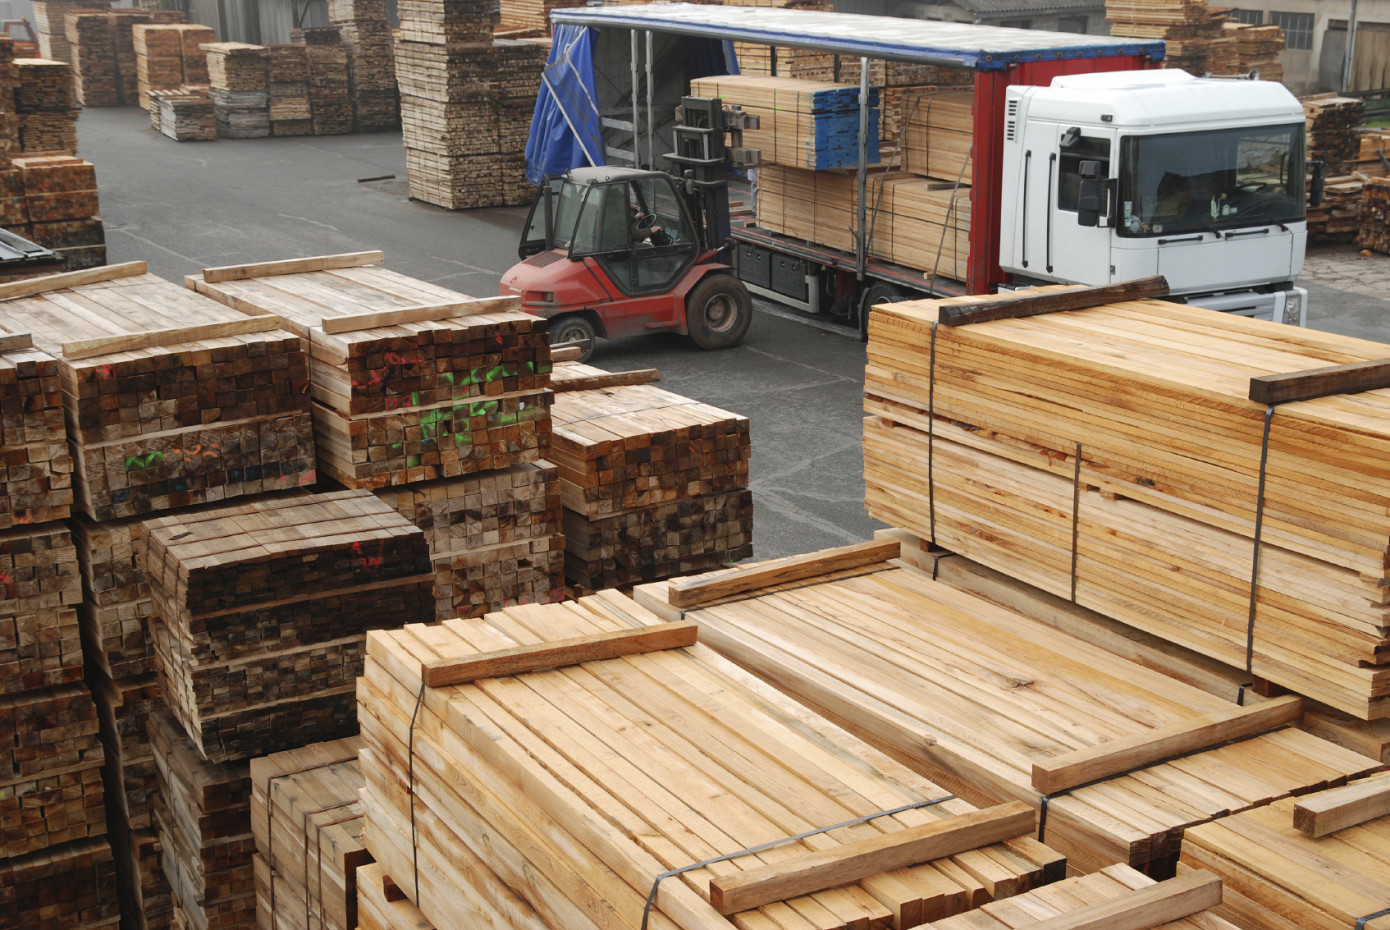 U.S. Department of Commerce determines duty rate of 7.99% on Canadian softwood lumber